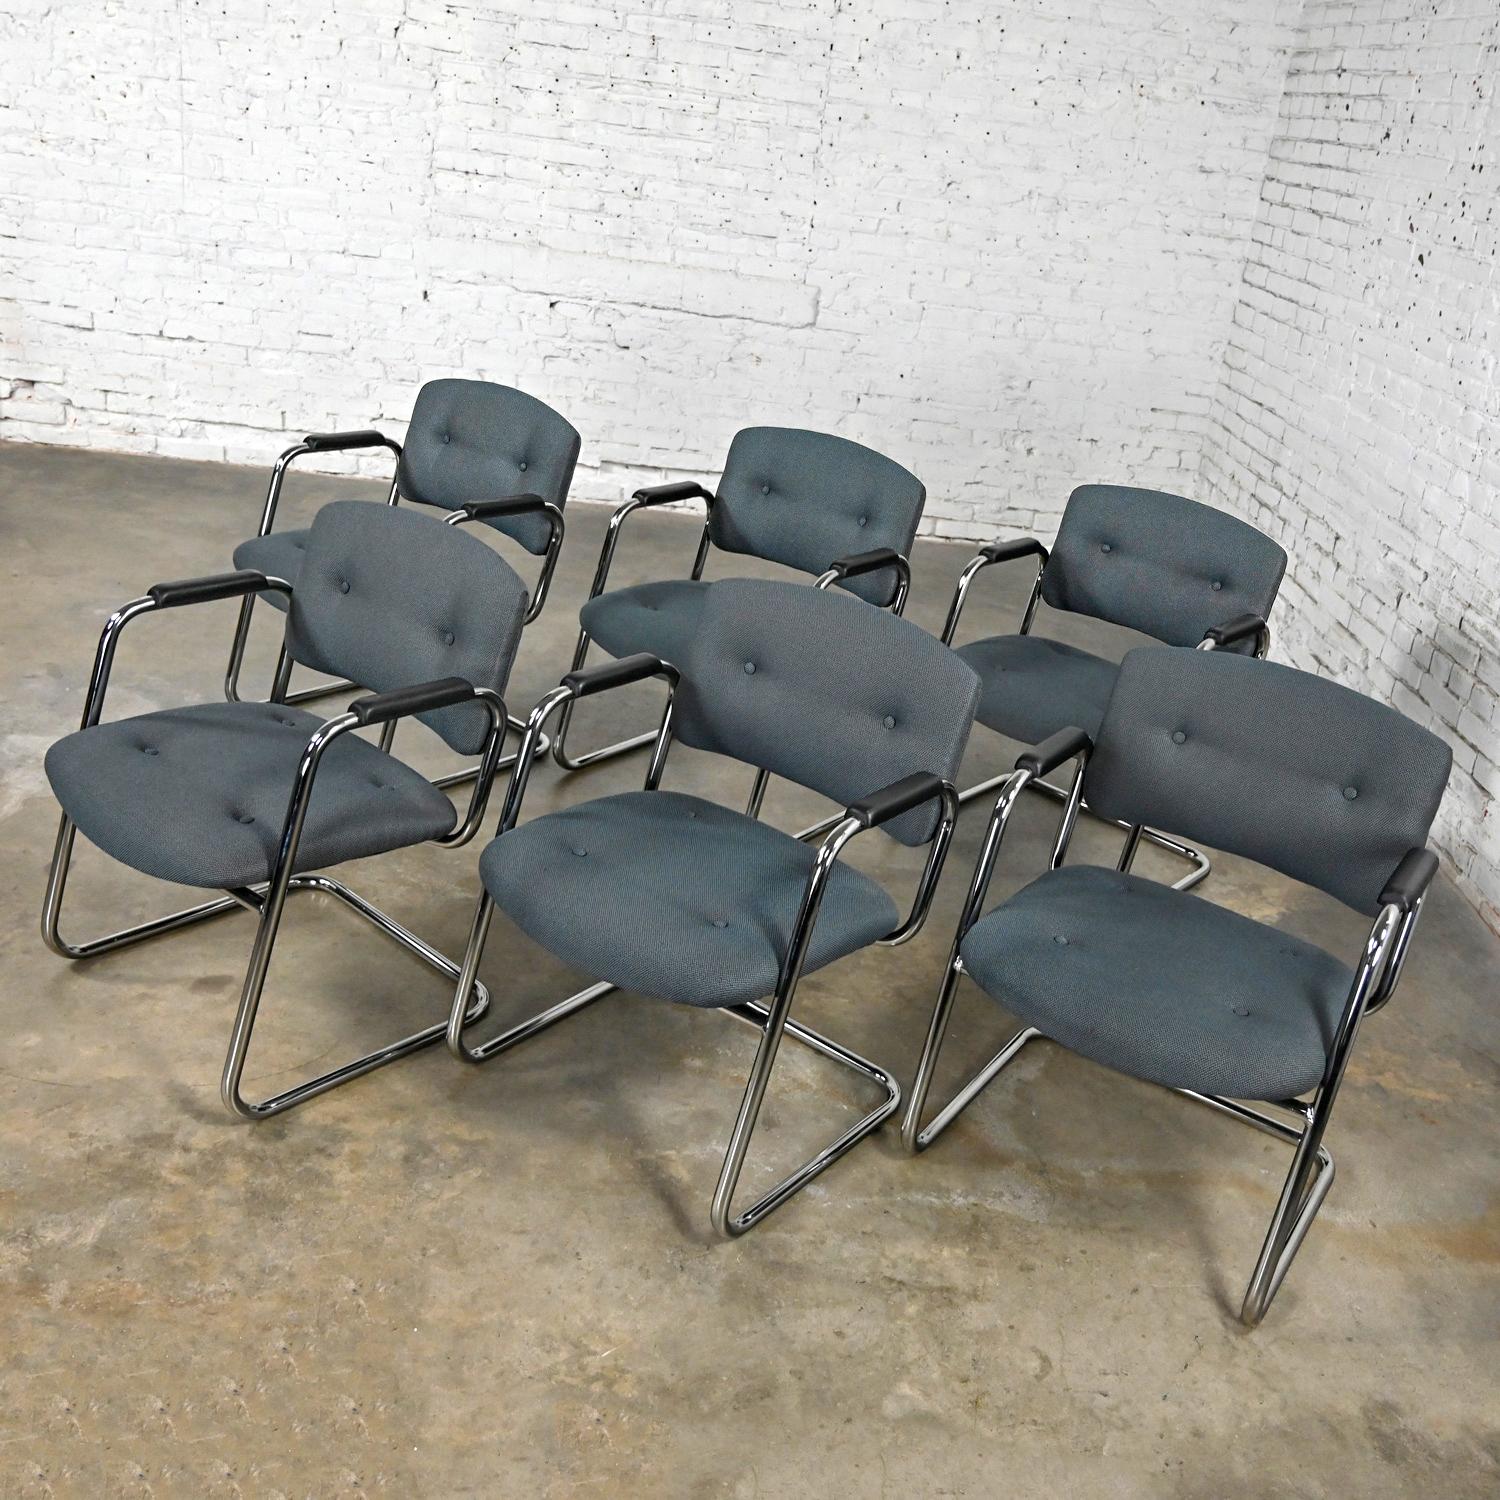 Late 20th Century Gray & Chrome Cantilever Chairs Style Steelcase Set of 6 In Good Condition For Sale In Topeka, KS